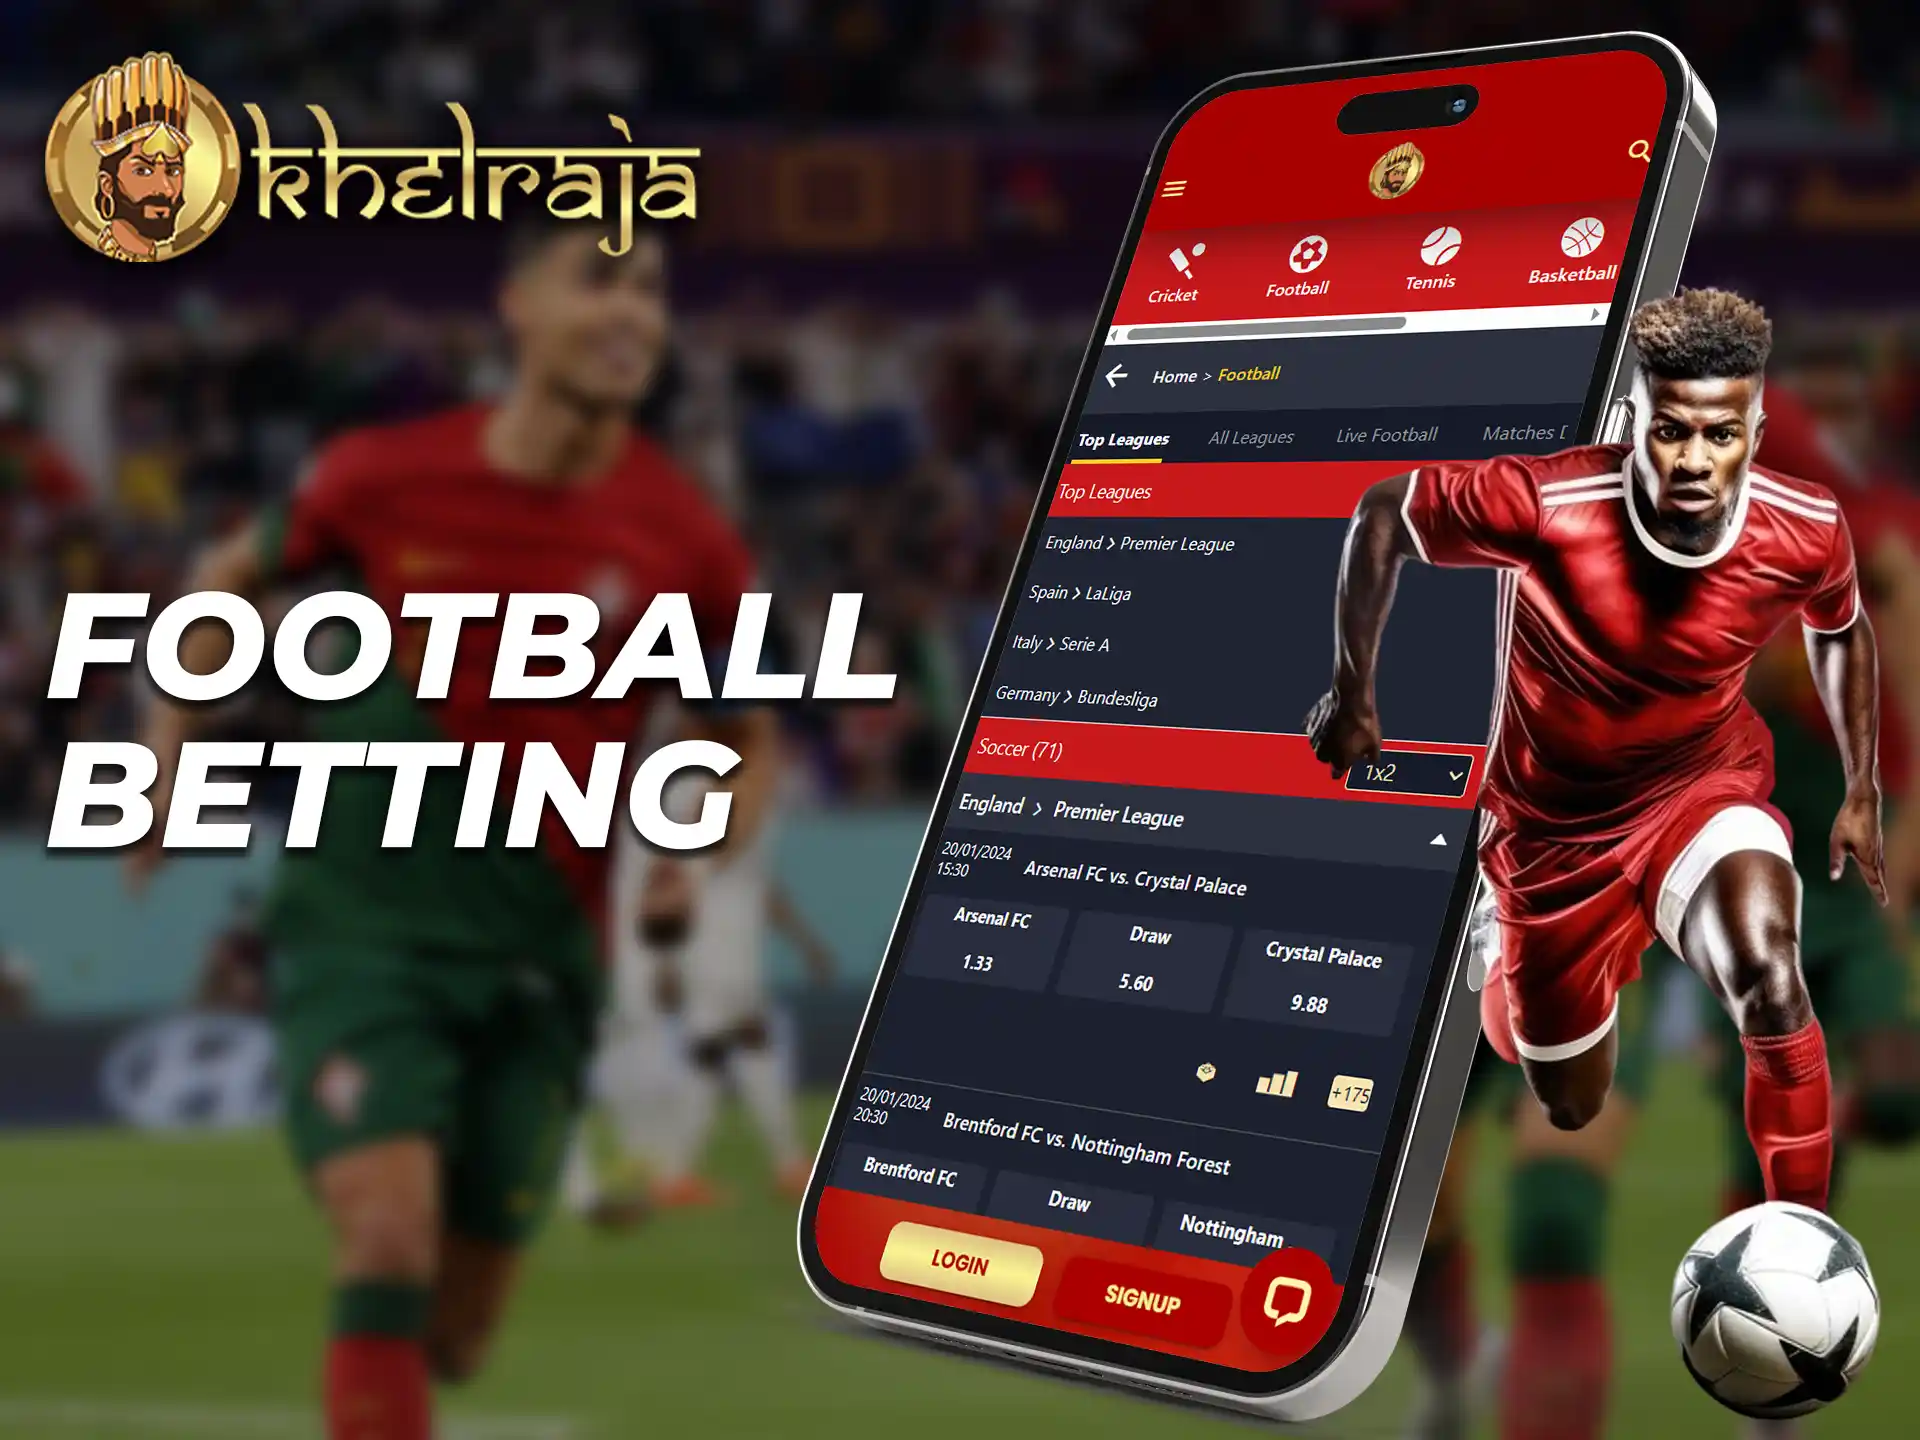 Betting on football and football matches live on the Khelraja app.